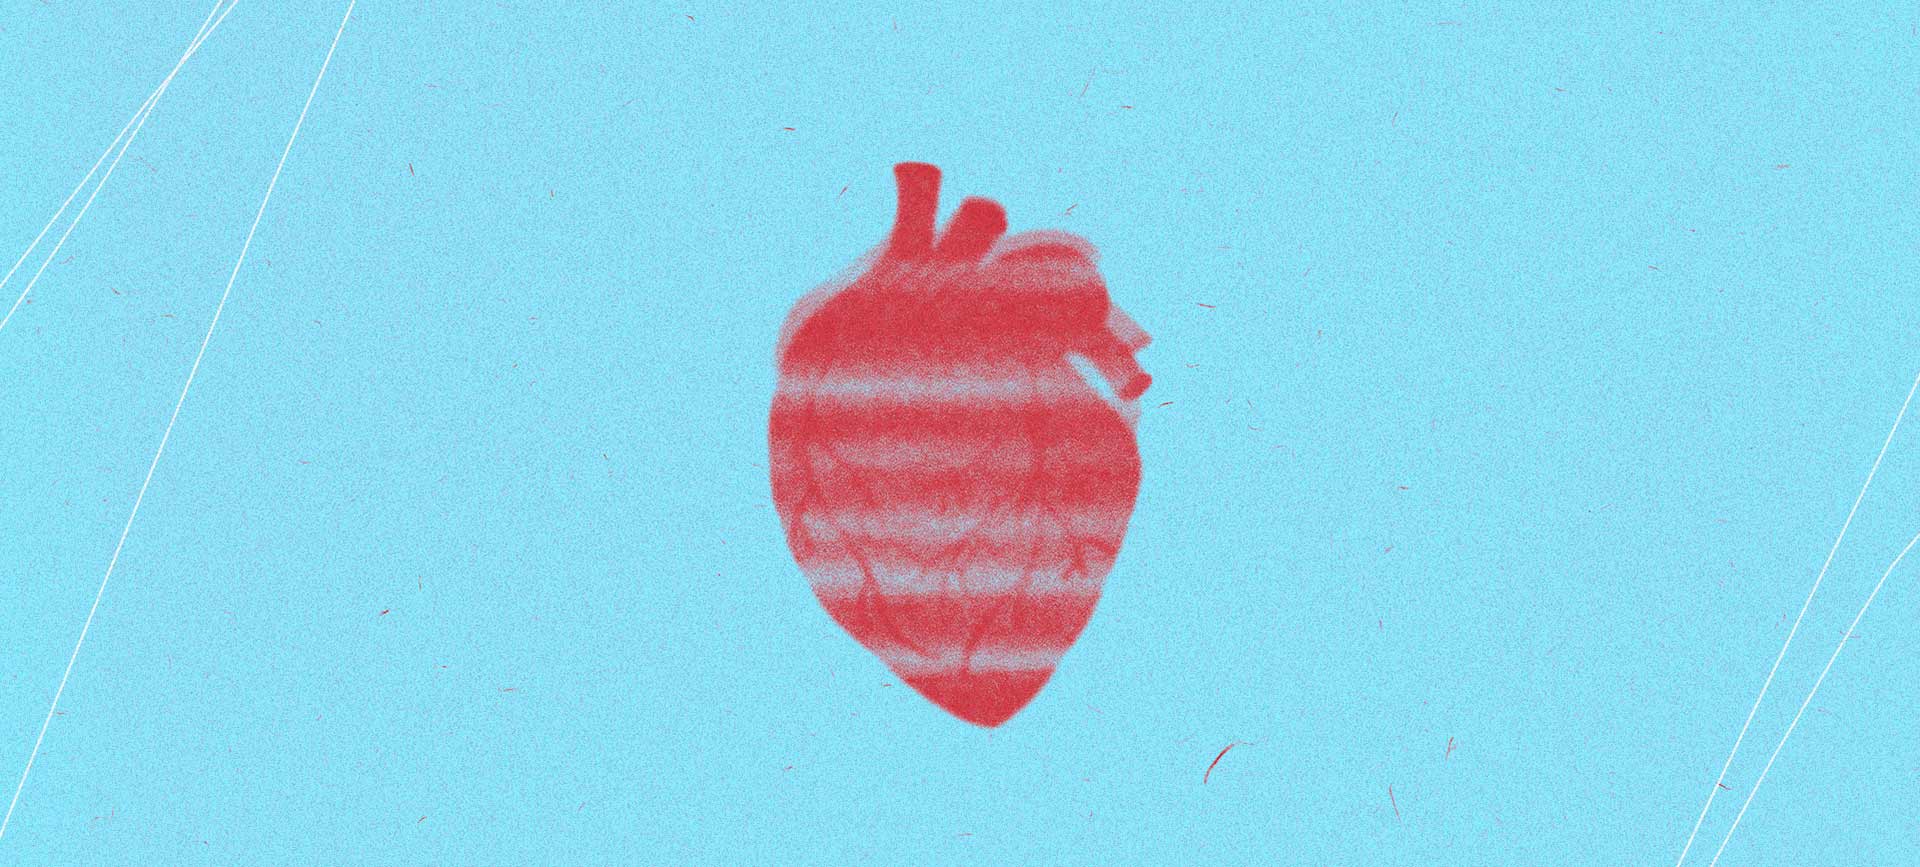 A red semi-transparent human heart with white stripes is blurred against a light blue background.